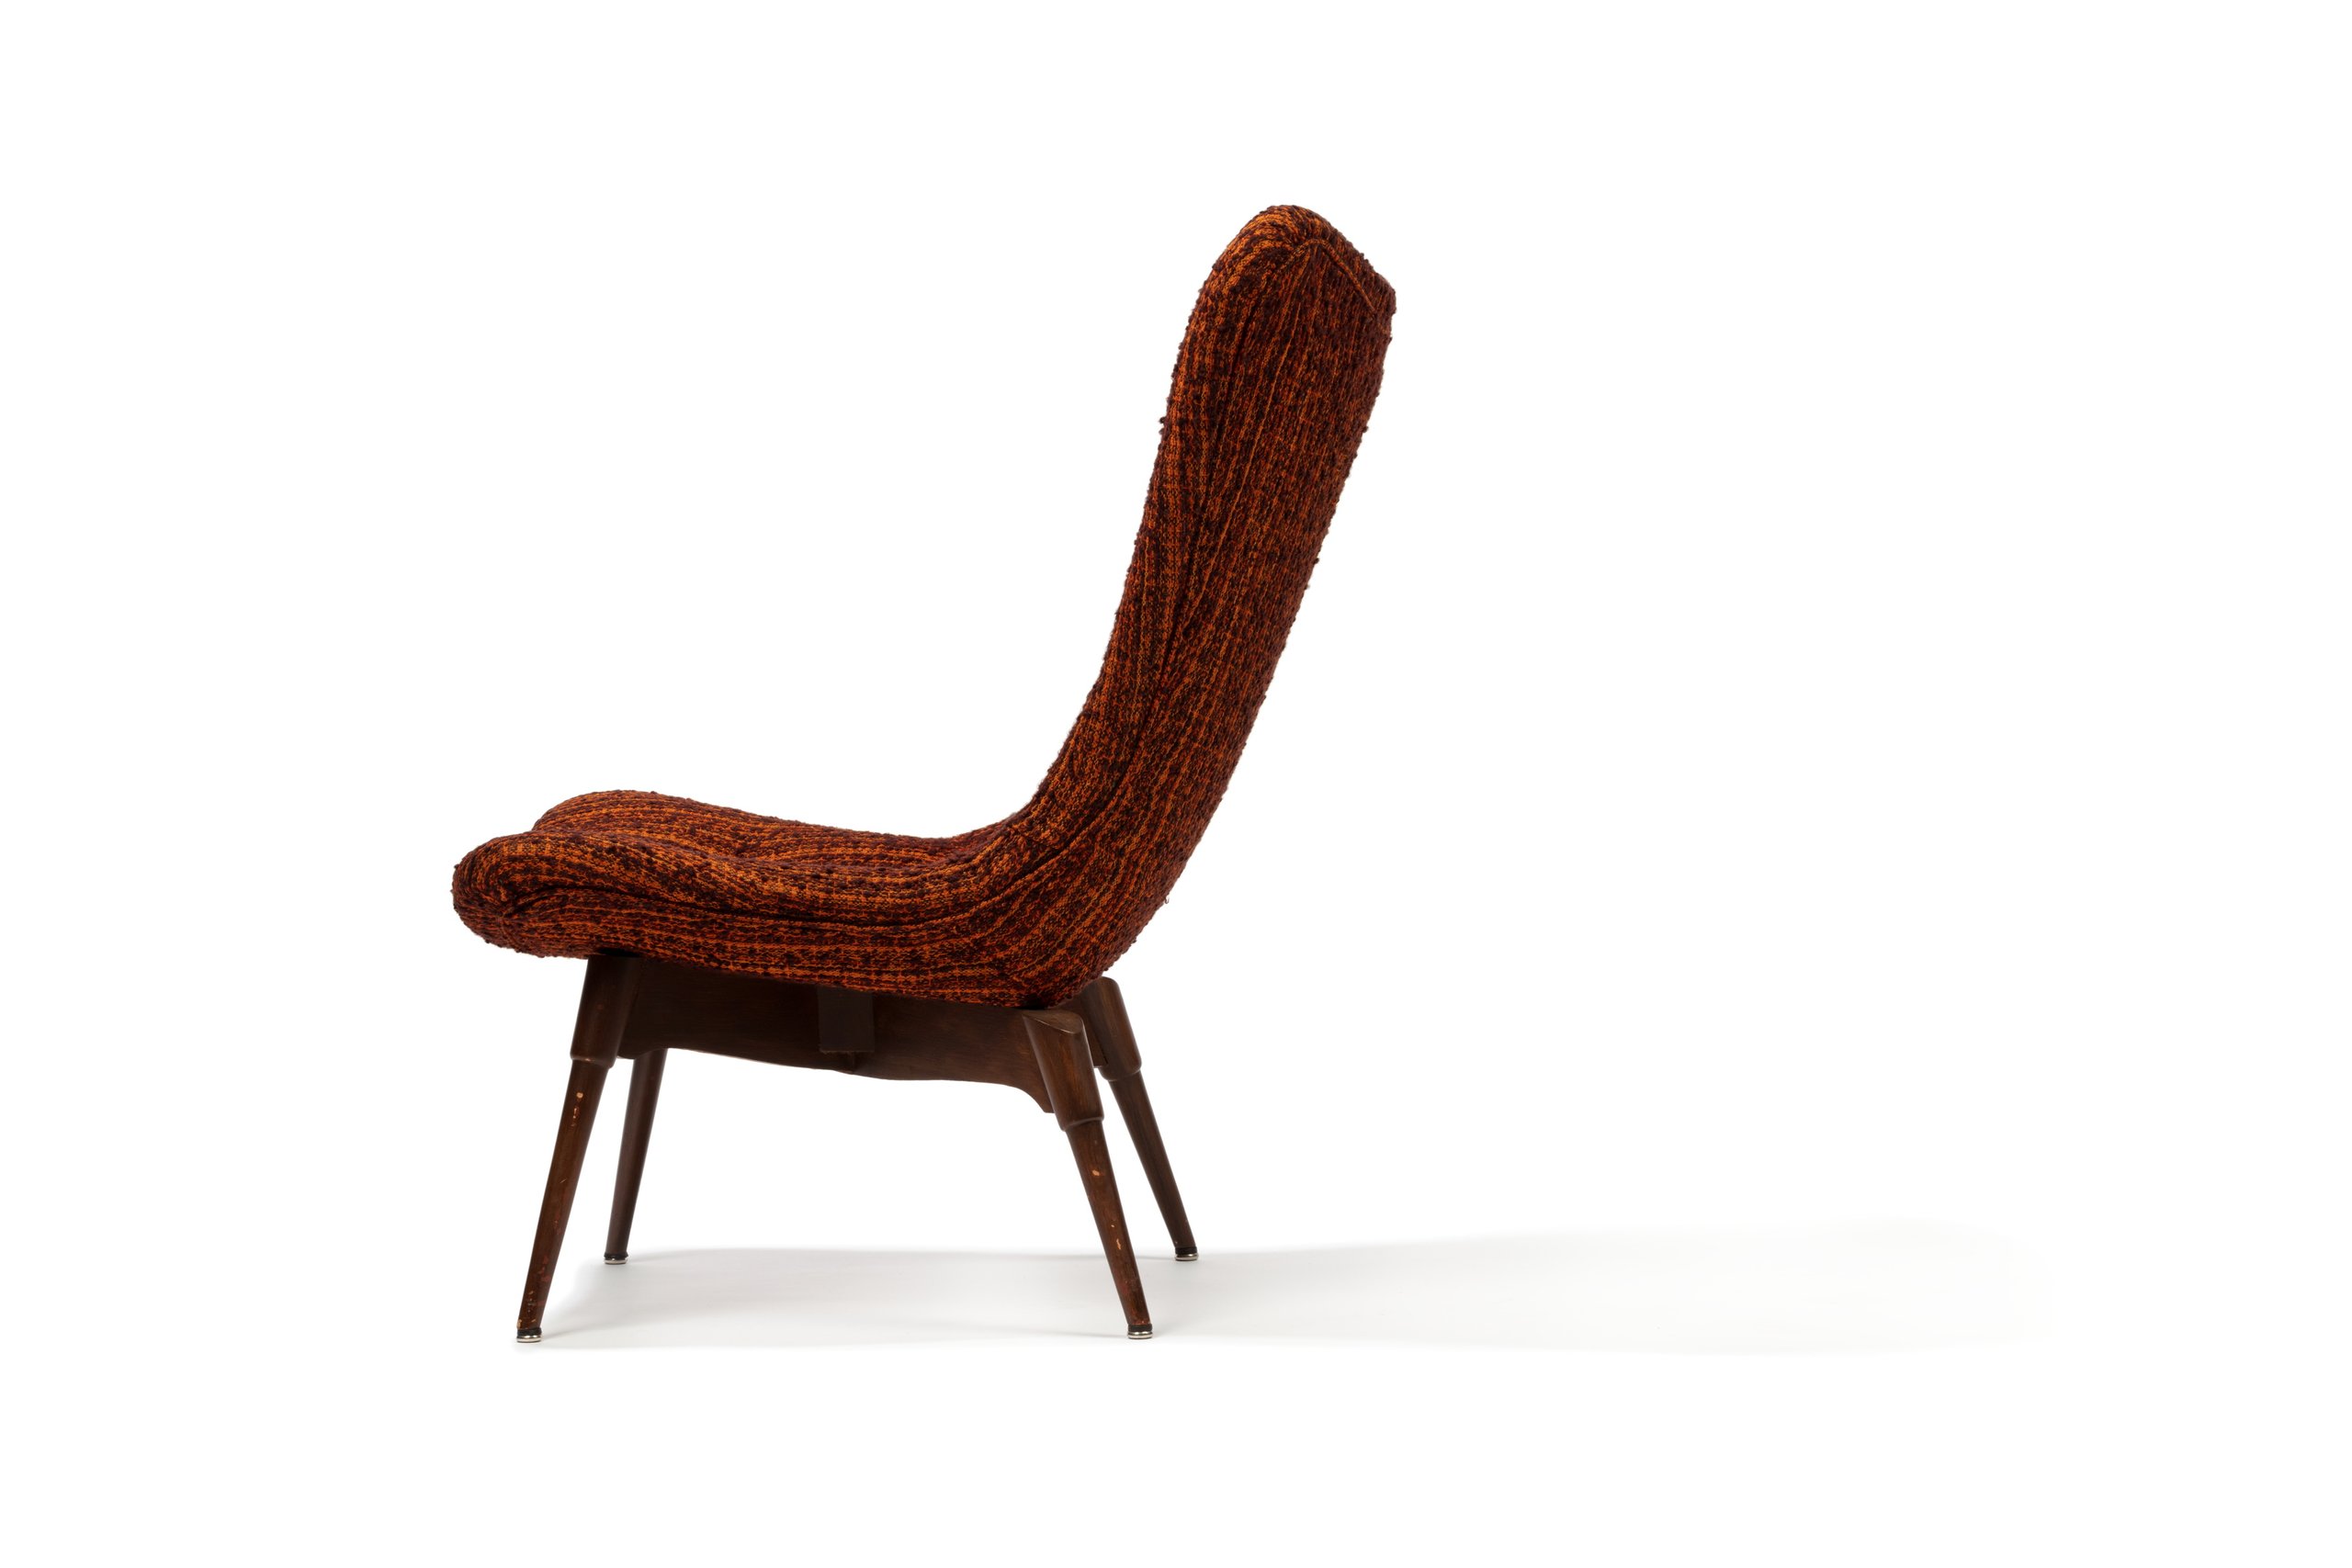 R152 chair designed by Grant Featherston